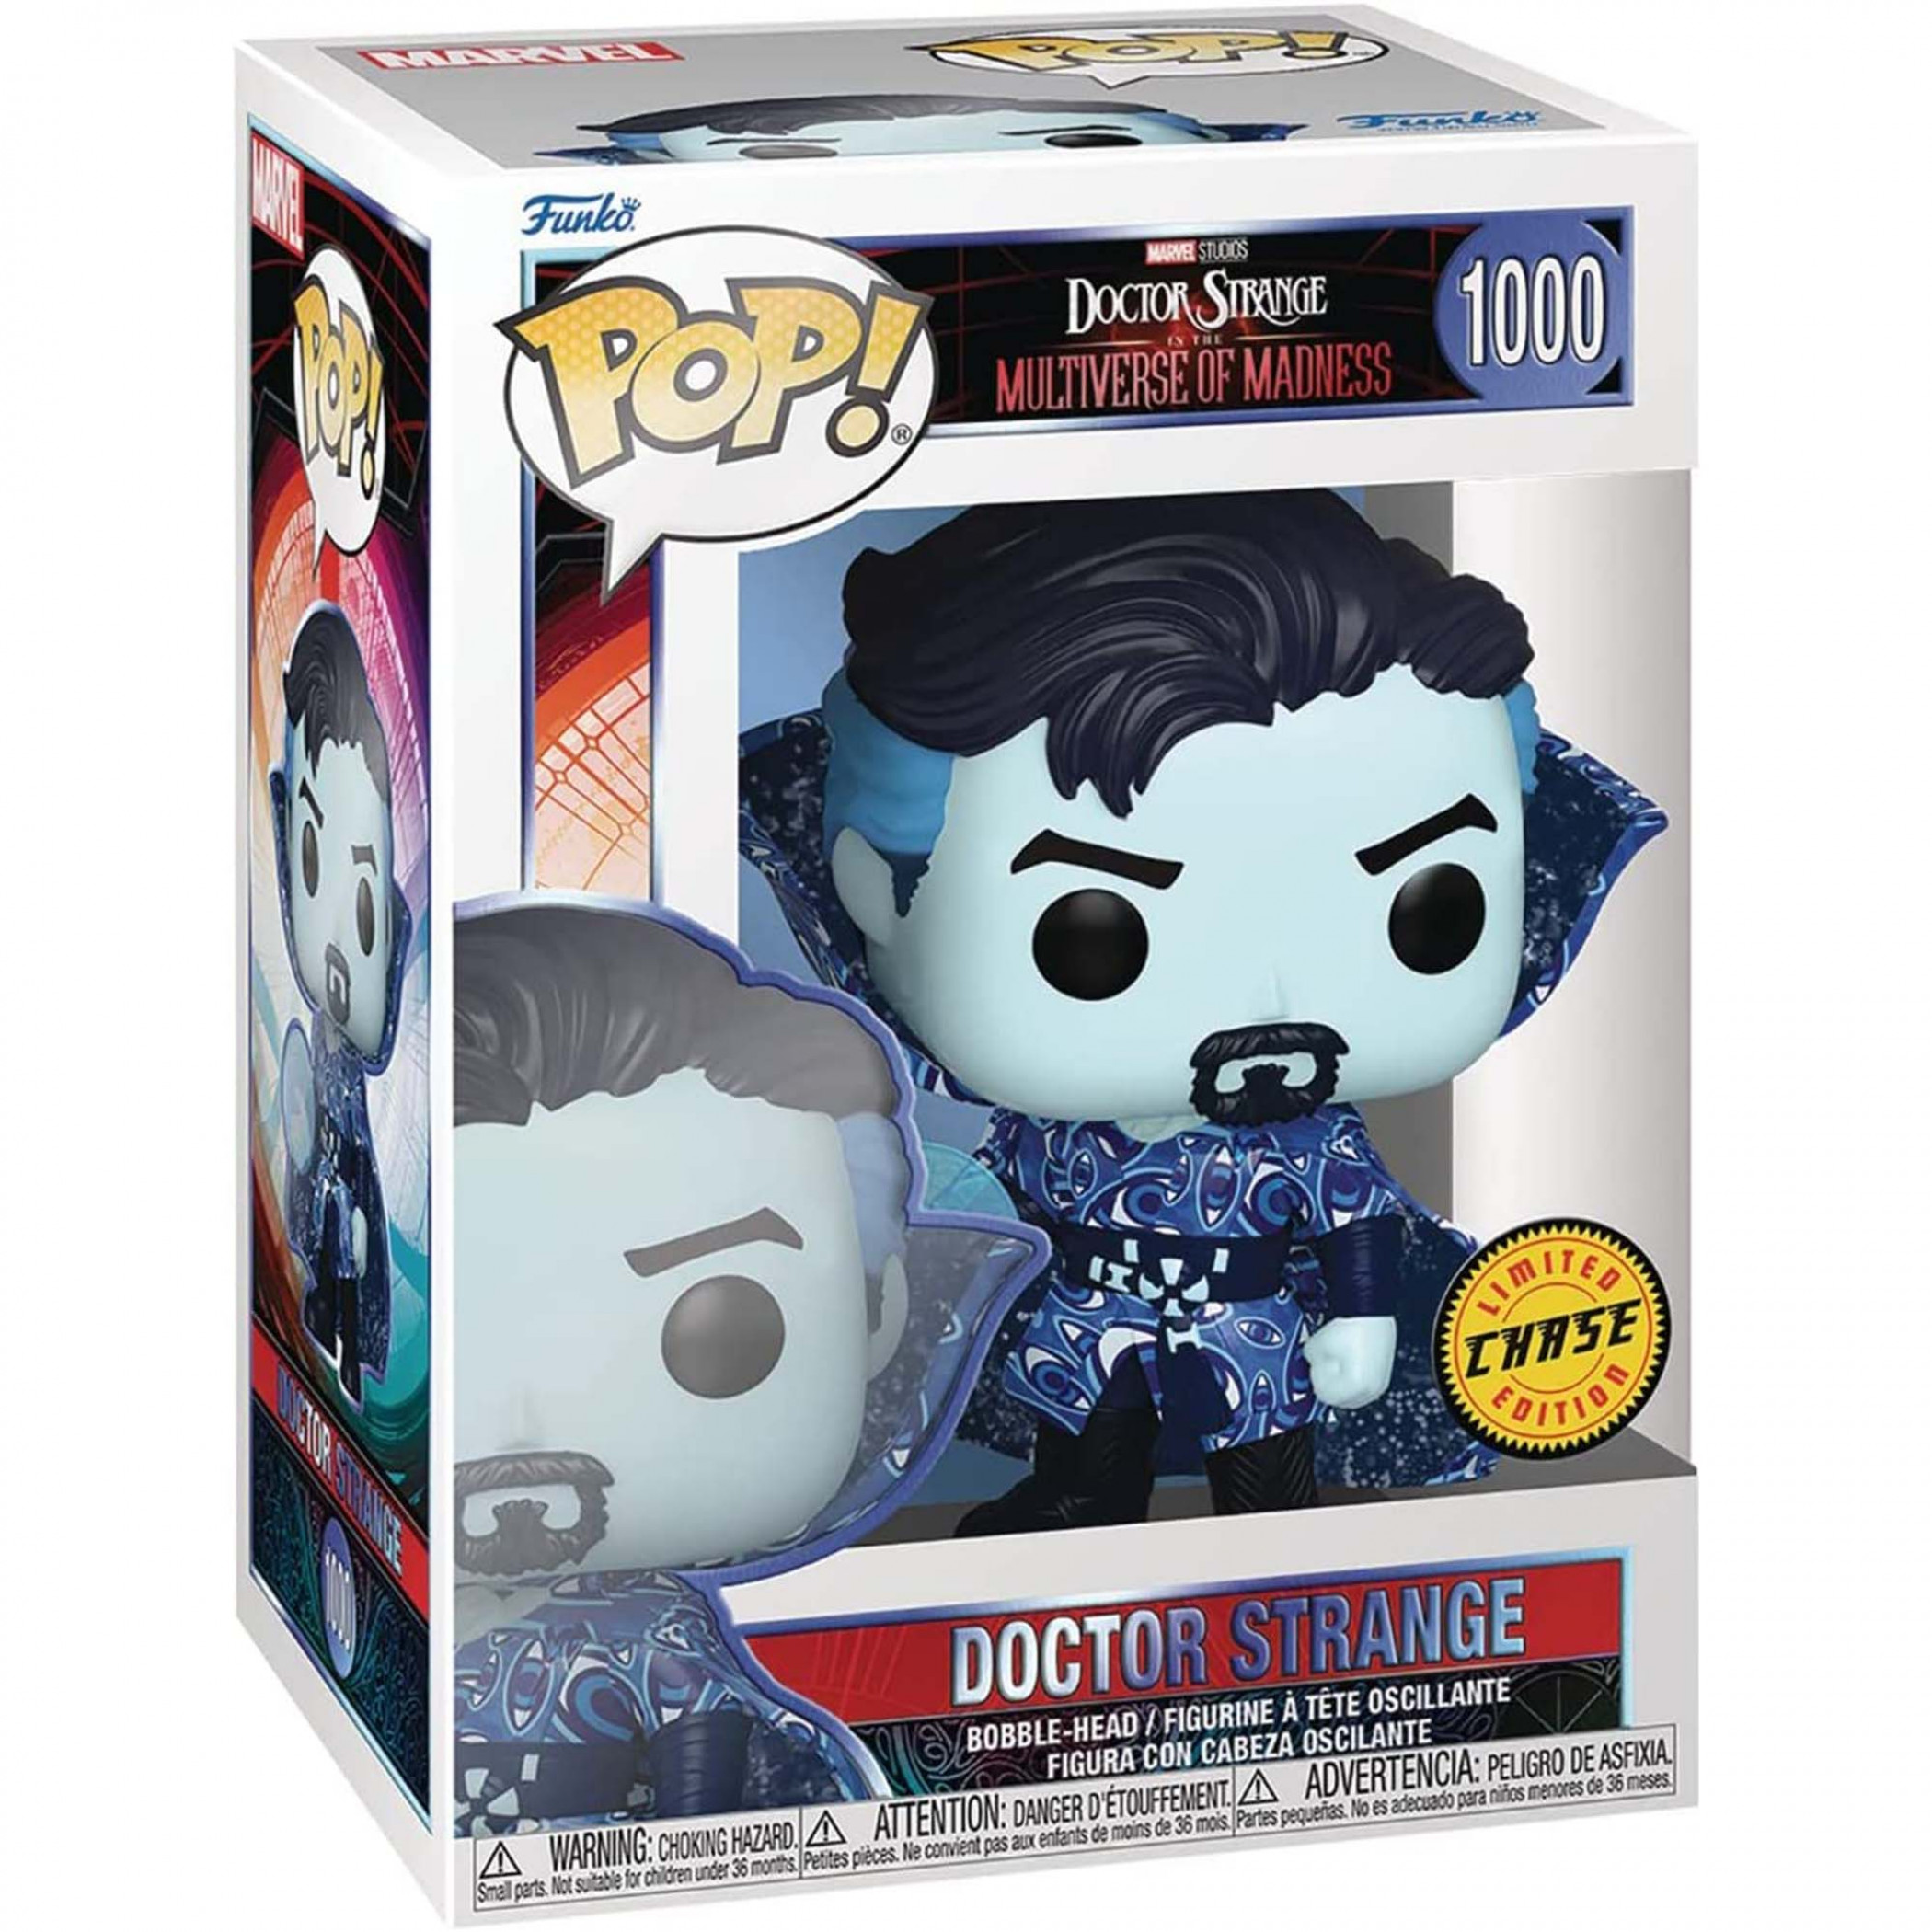 Doctor Strange Multiverse of Madness Limited Chase Edition Funko Pop! Vinyl Figure